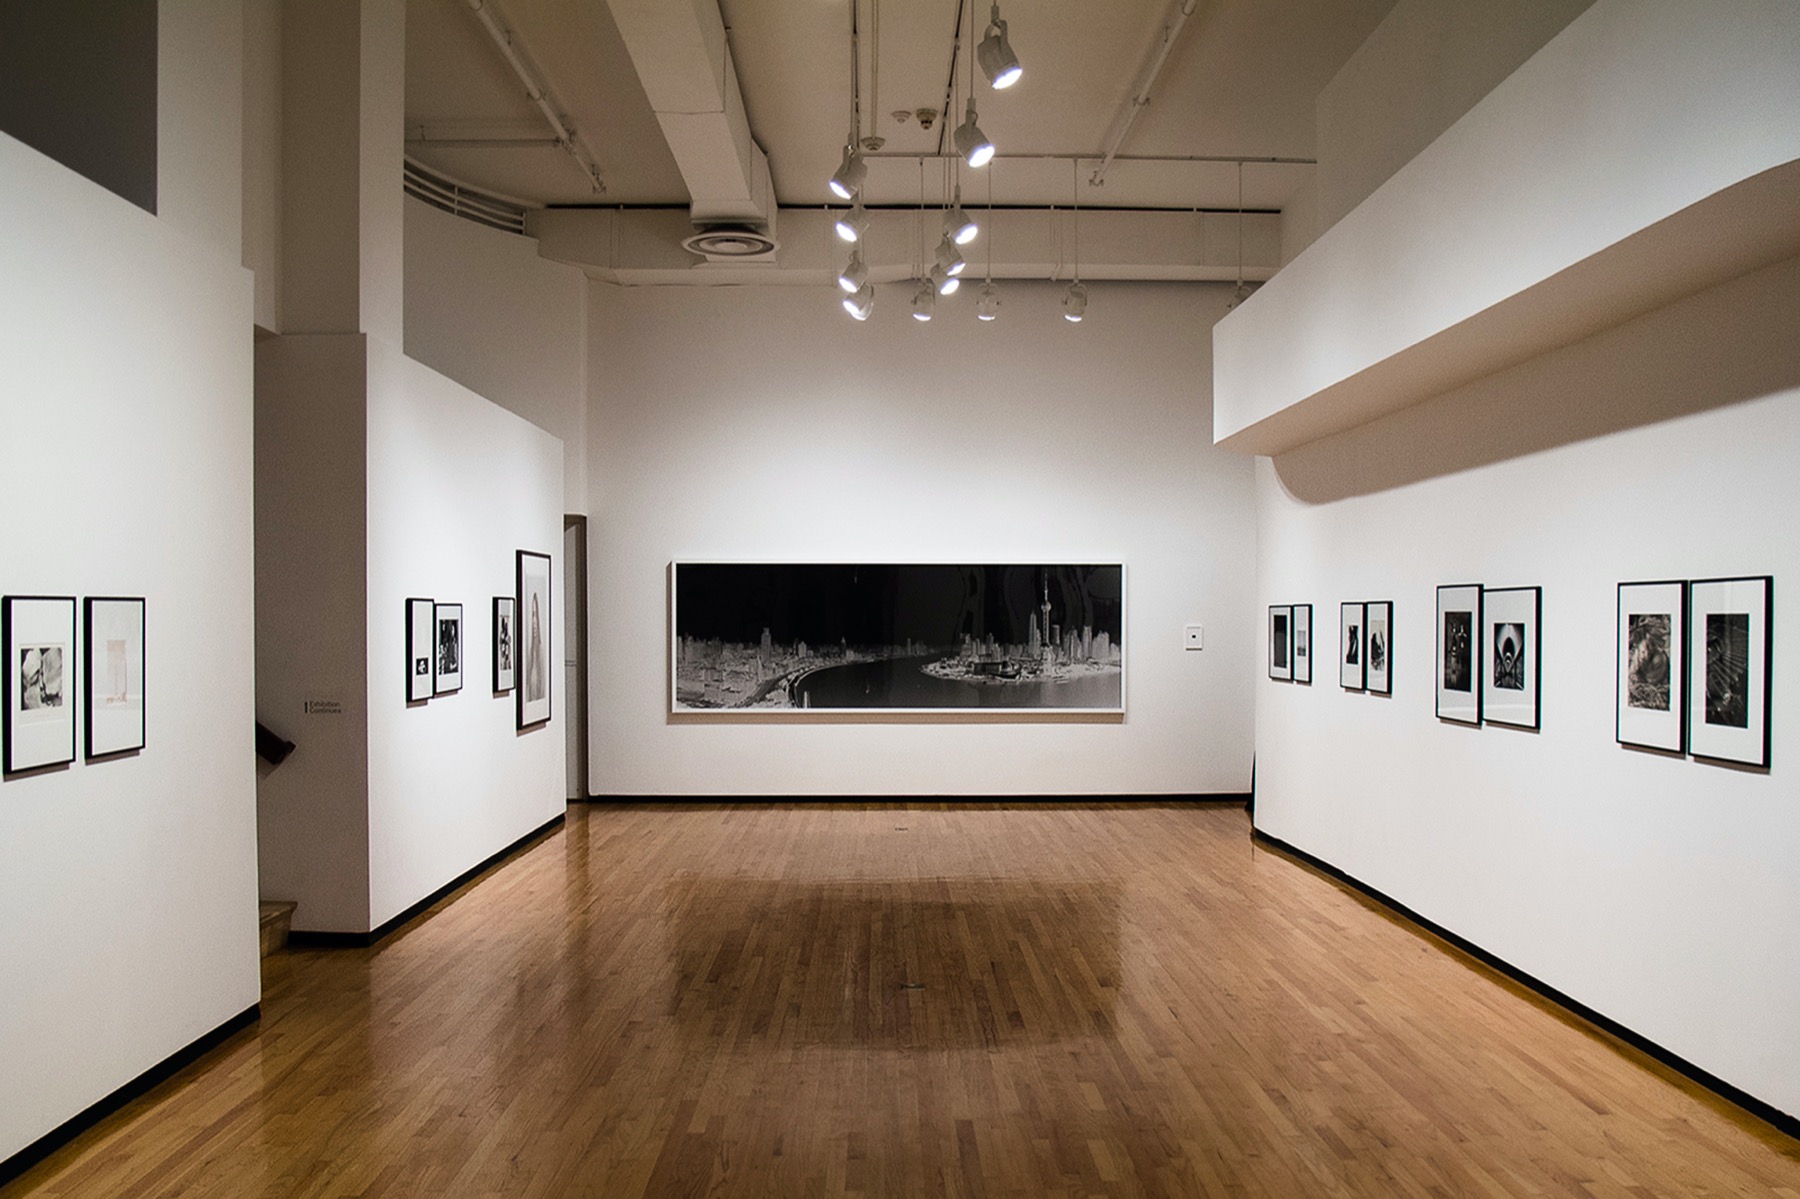 The Museum of Contemporary Photography